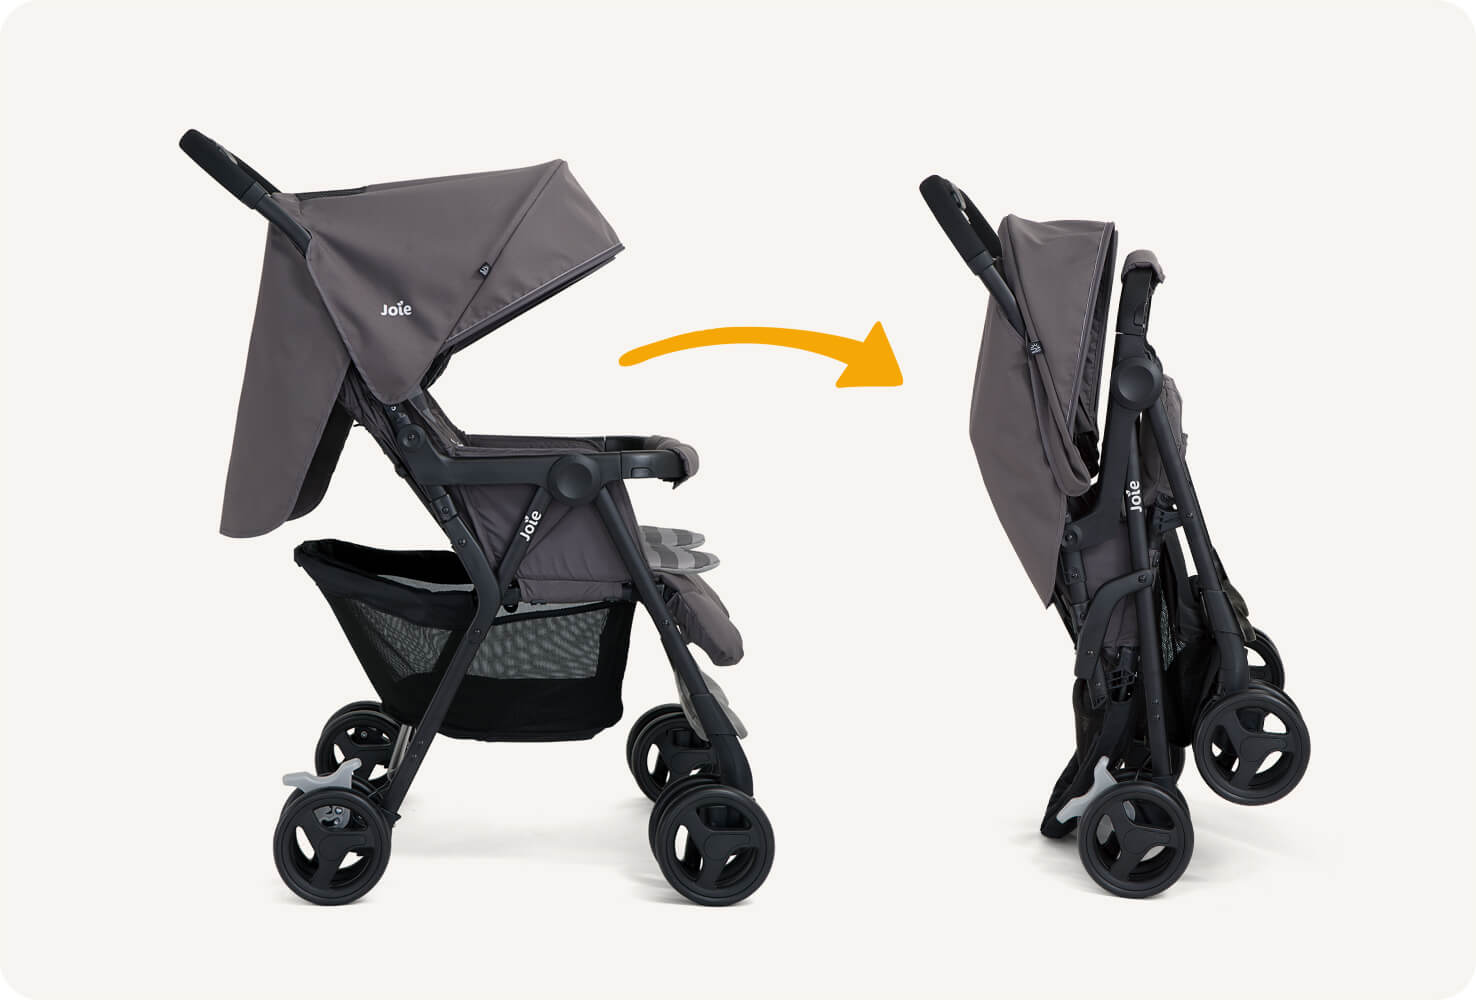 Two light gray Joie Aire Twin double strollers side by side in profile facing to the right: the stroller on the left is open and the stroller on the right is folded, with an orange arrow pointing from the left to the right.